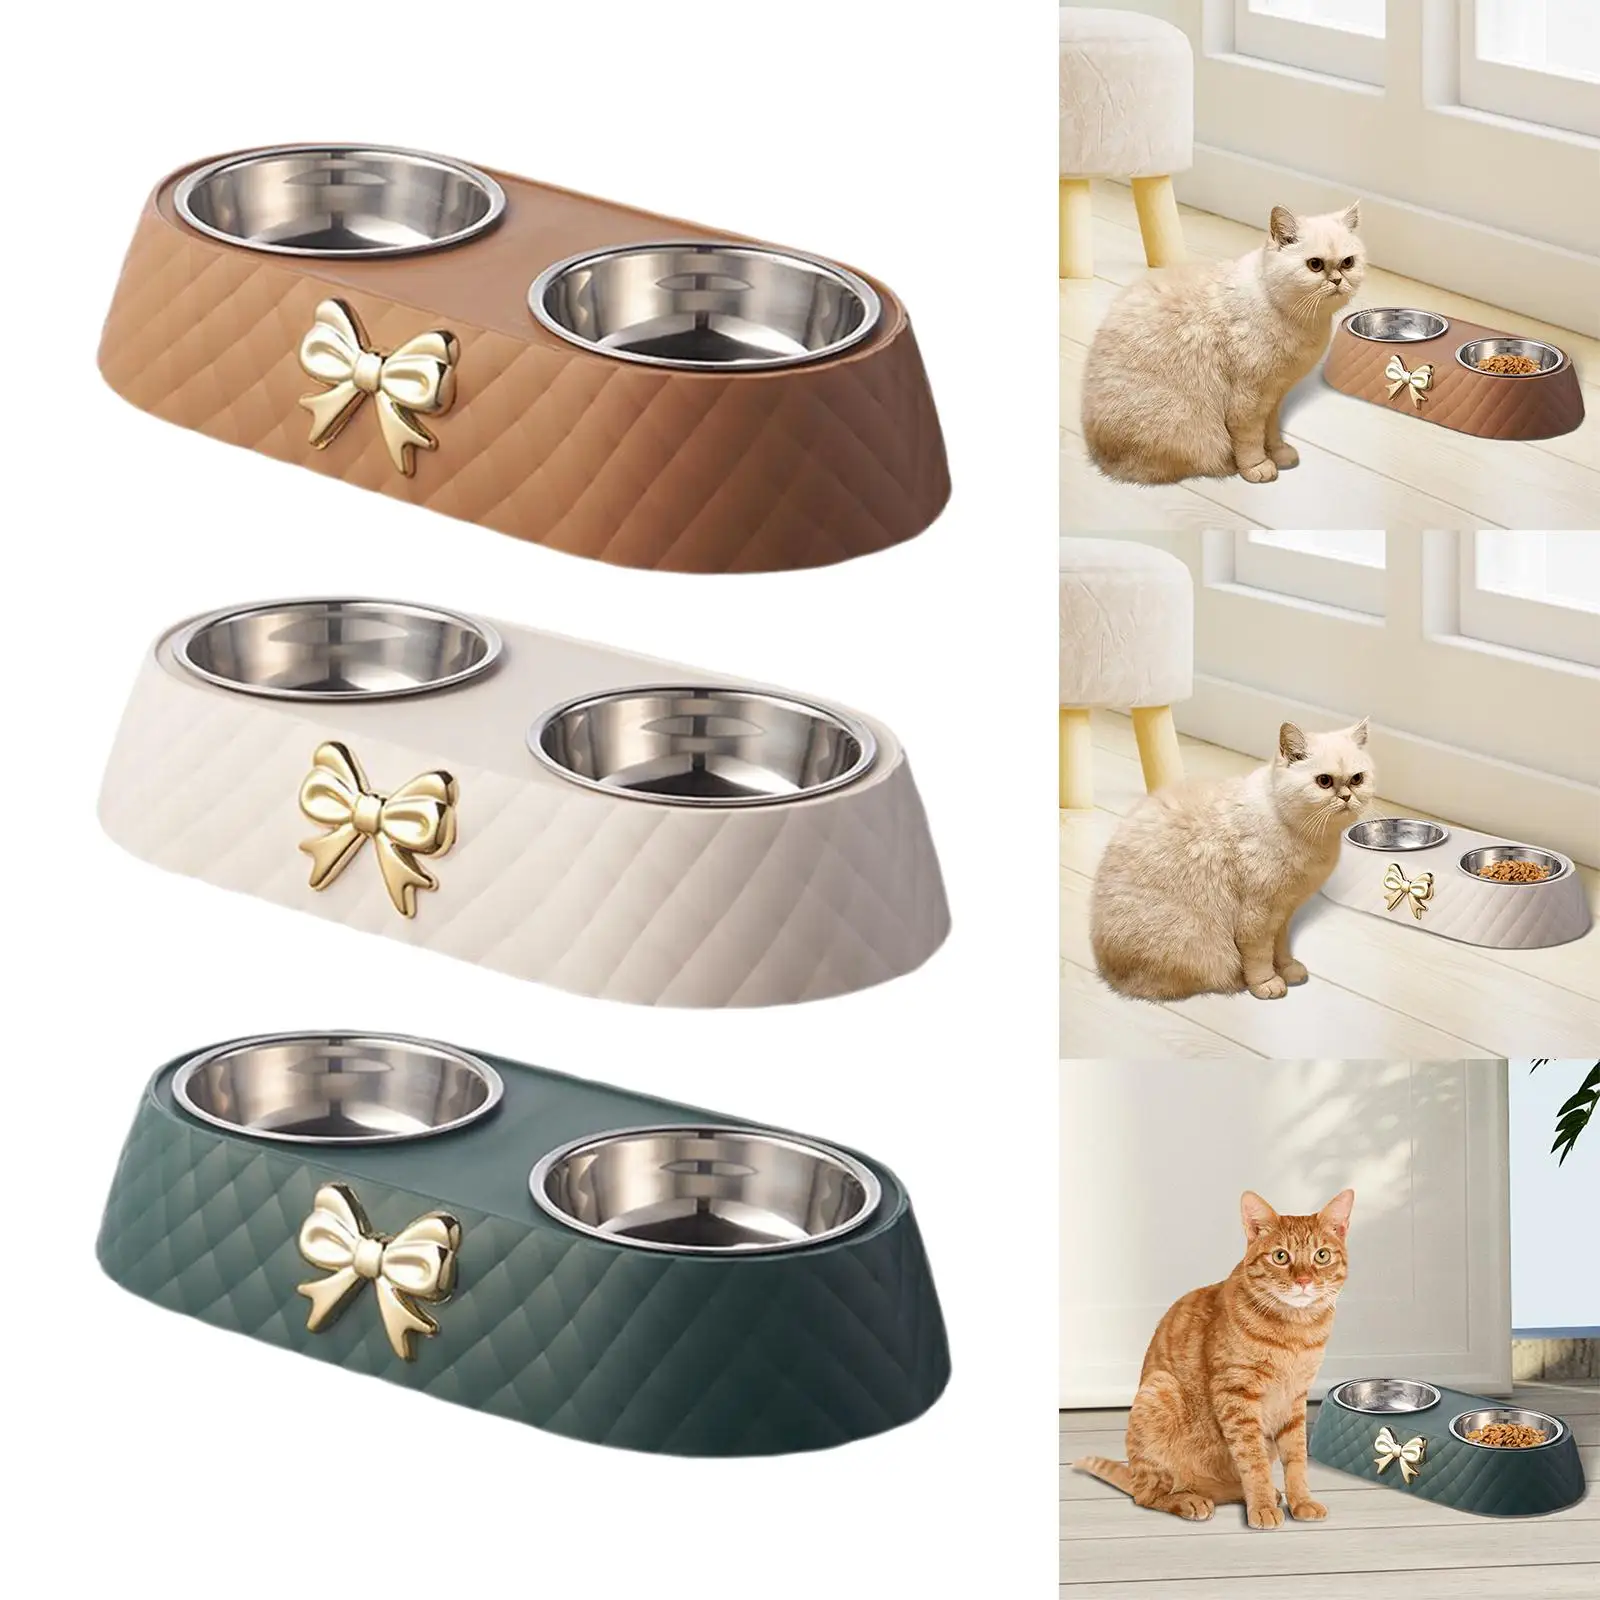 2 in 1 Dog Cat Bowls Removable Anti Slip Size 34x17.5x6.5cm Accessory Simple to Clean Durable Convenient for Small Dogs Puppy